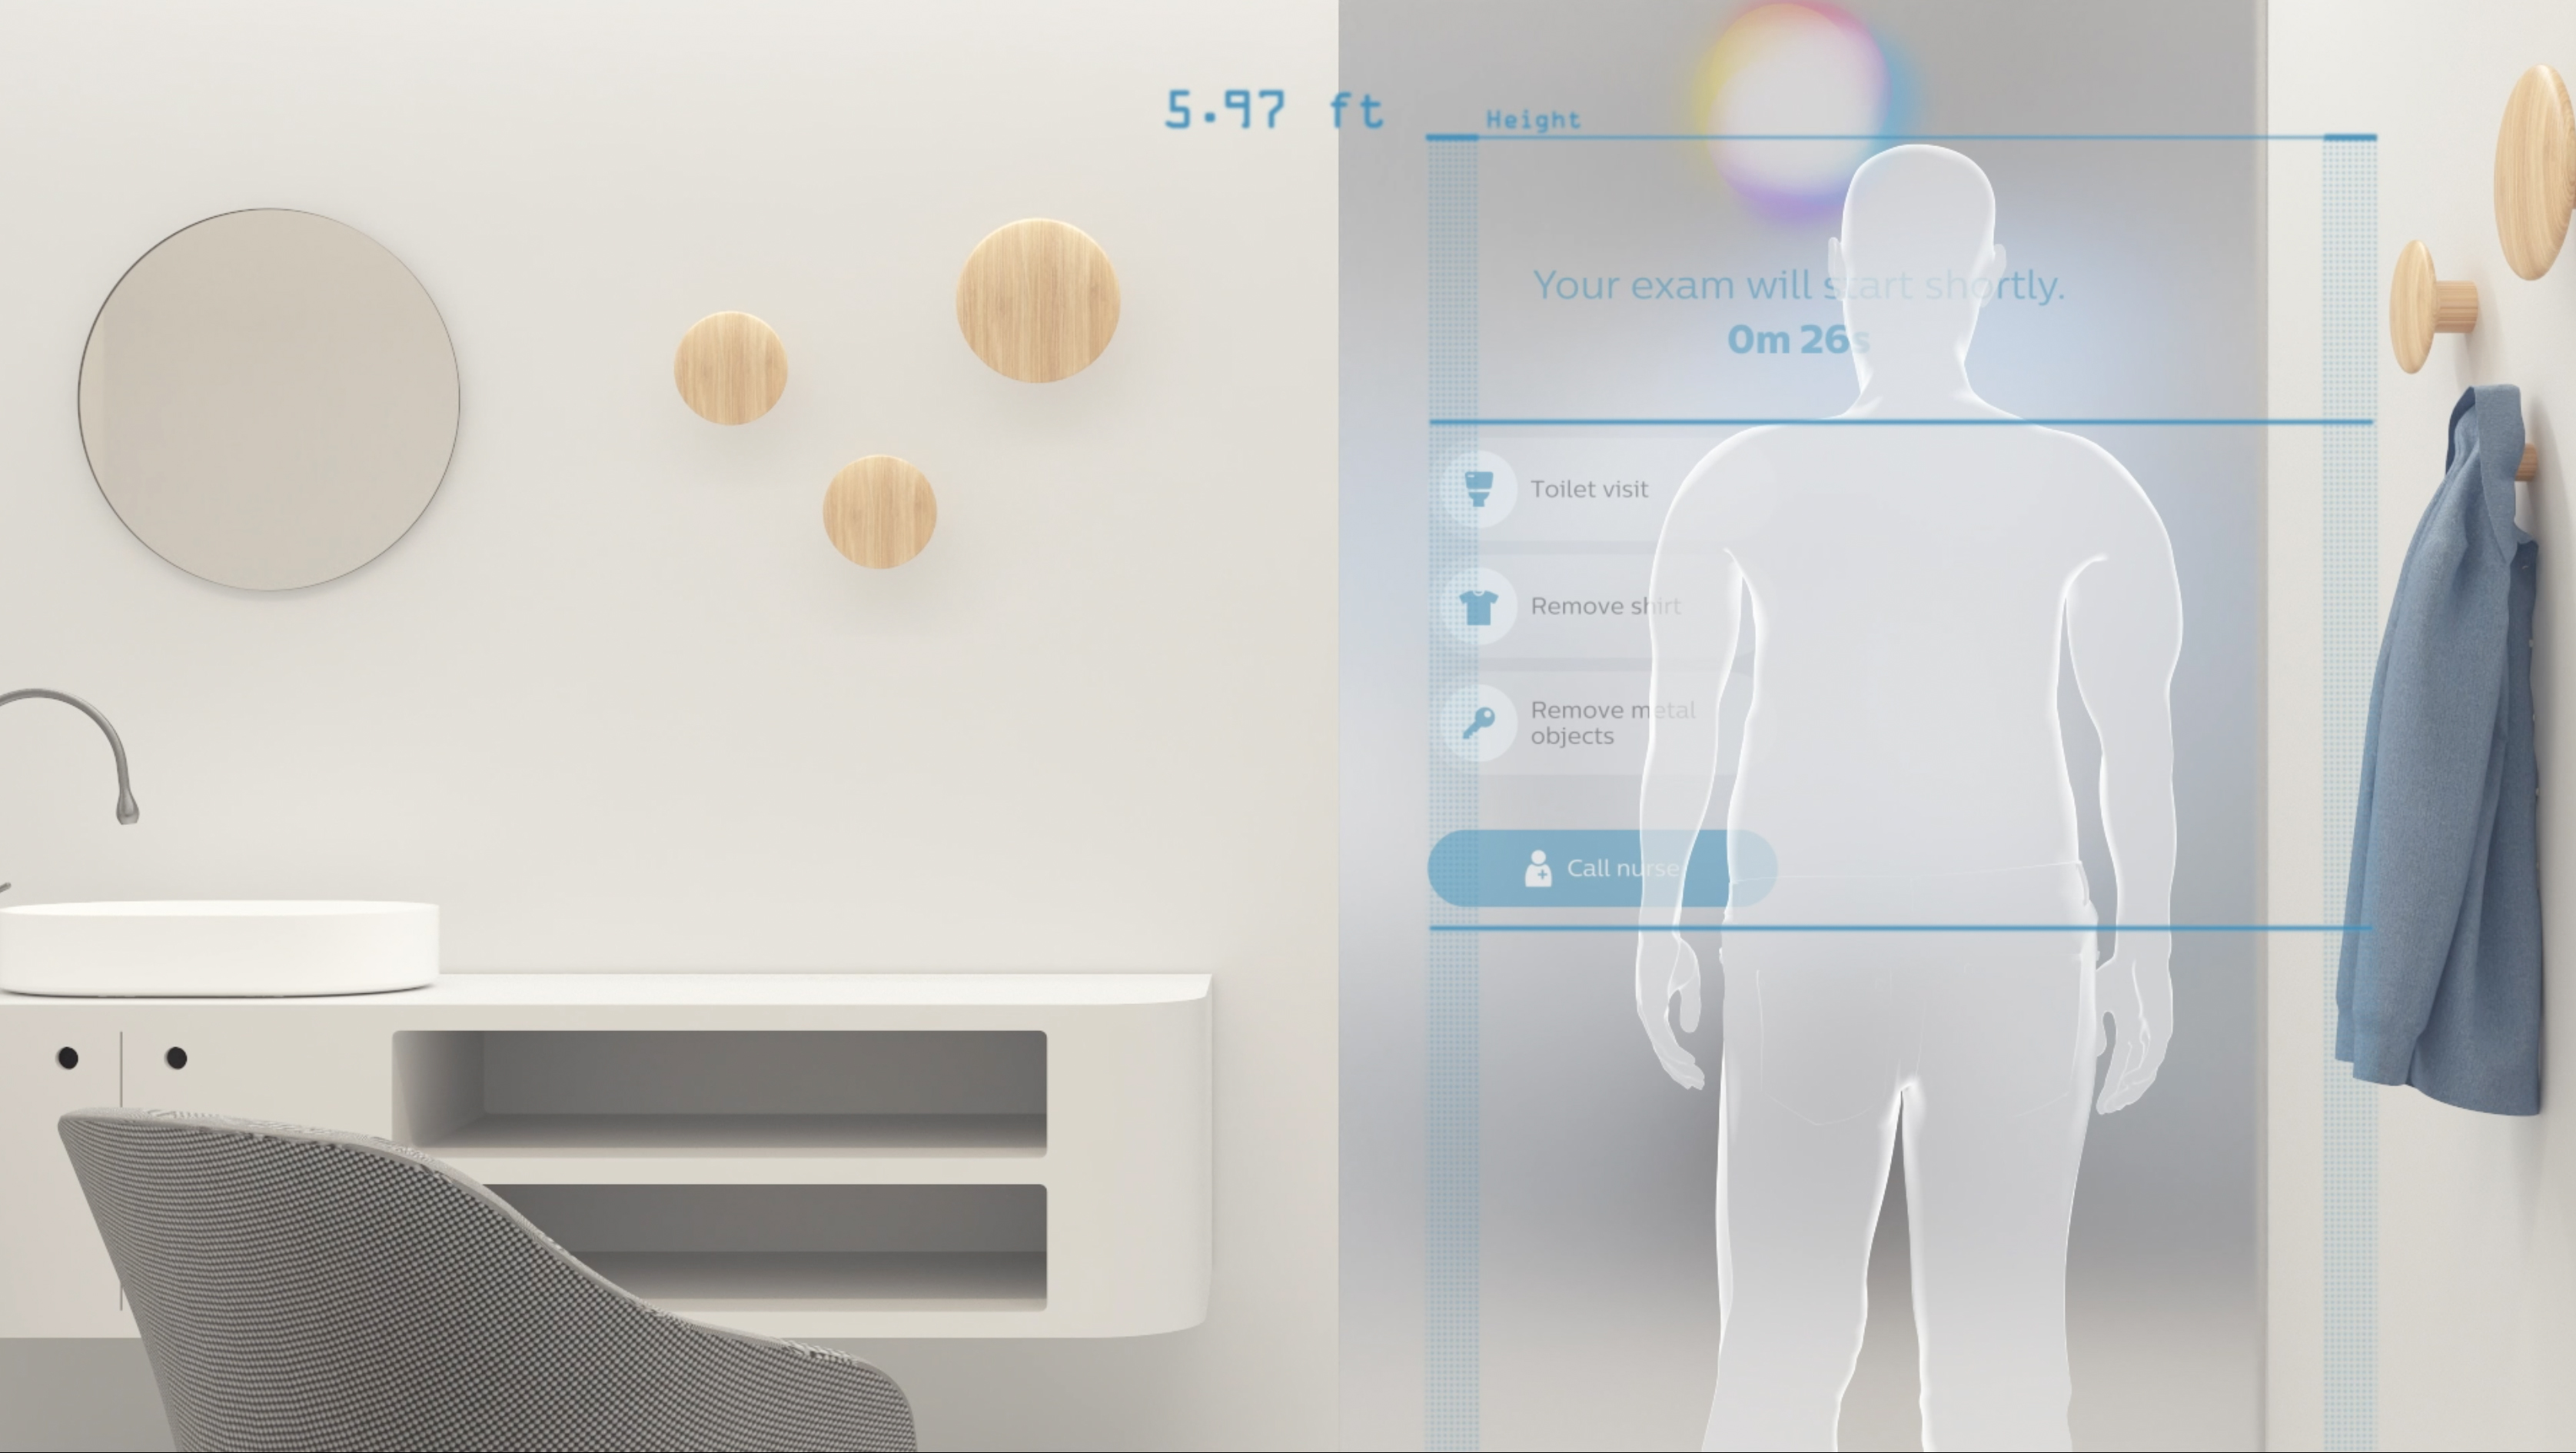 MUSE Design Winners - Philips Radiology Vision